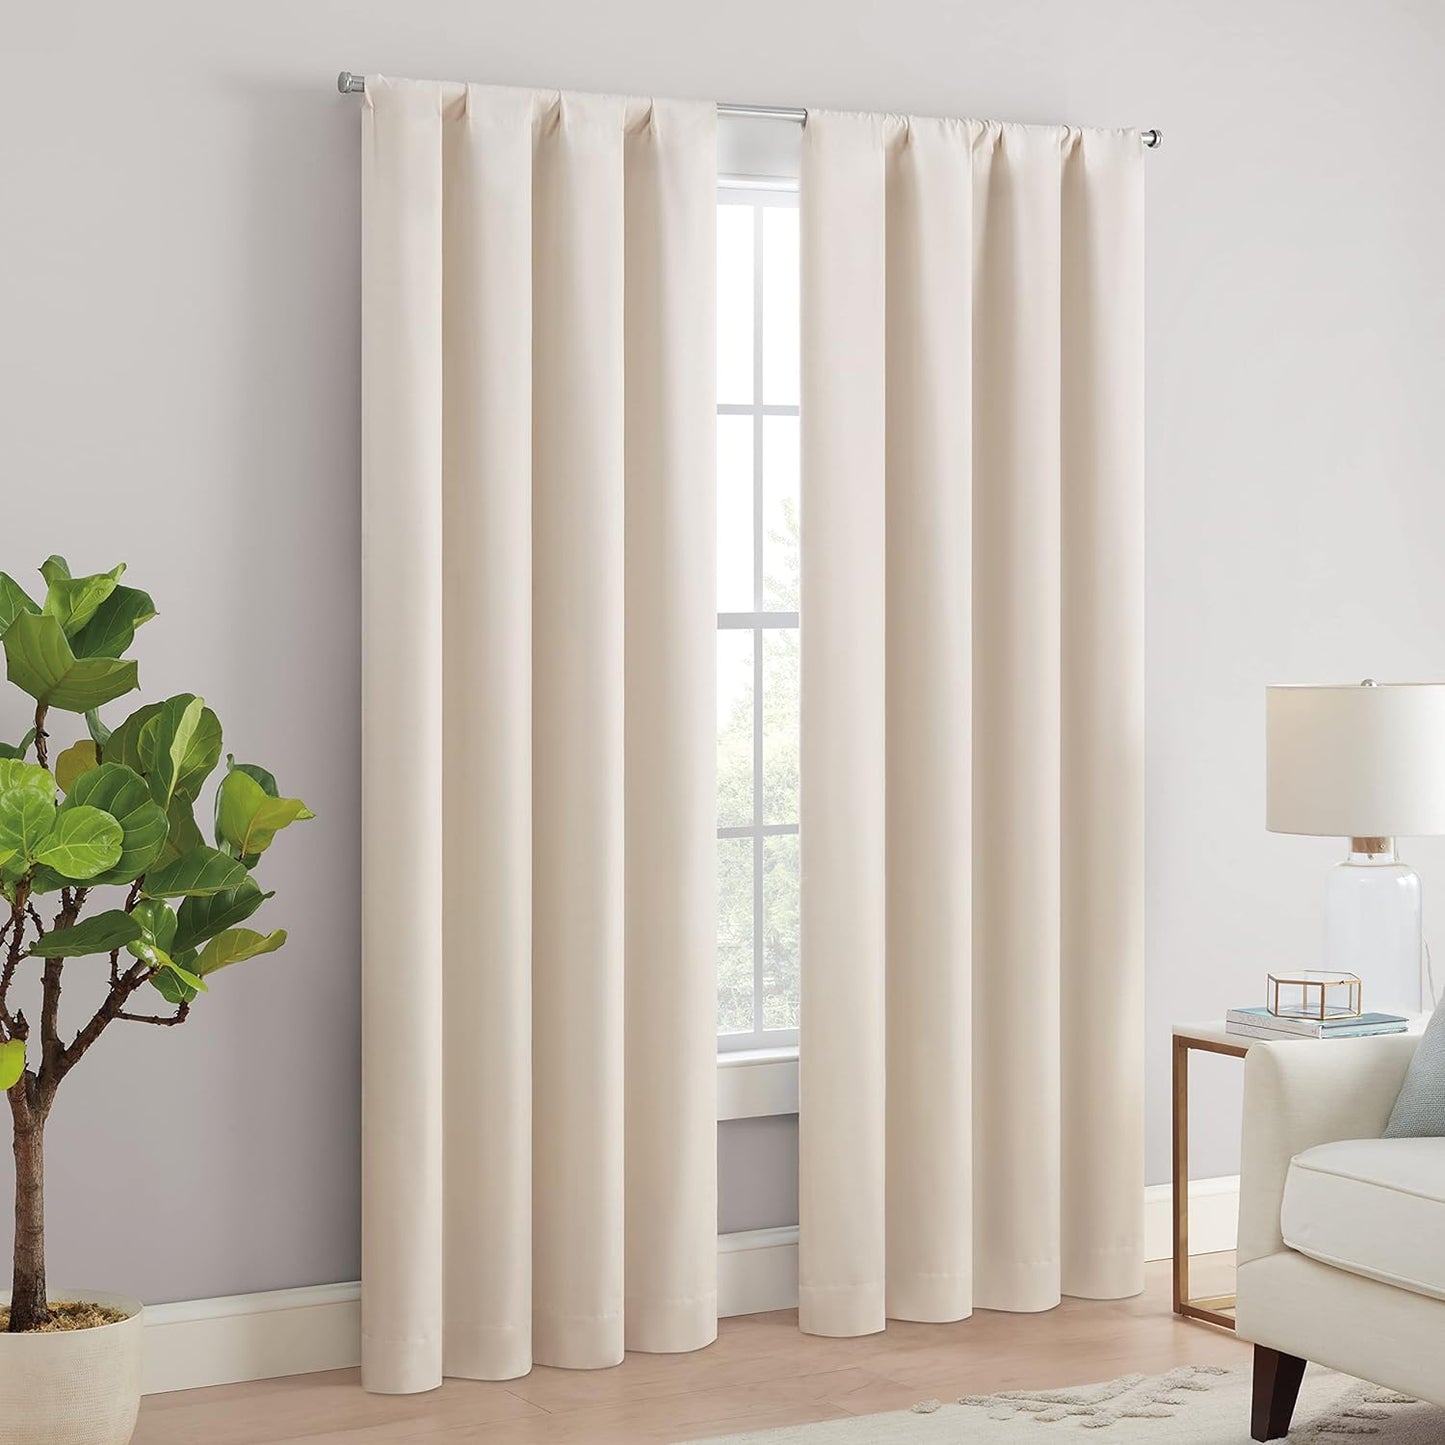 Eclipse Cannes Magnitech 100% Blackout Curtain, Rod Pocket Window Curtain Panel, Seamless Magnetic Closure for Bedroom, Living Room or Nursery, 63 in Long X 40 in Wide, (1 Panel), Ivory  KEECO   